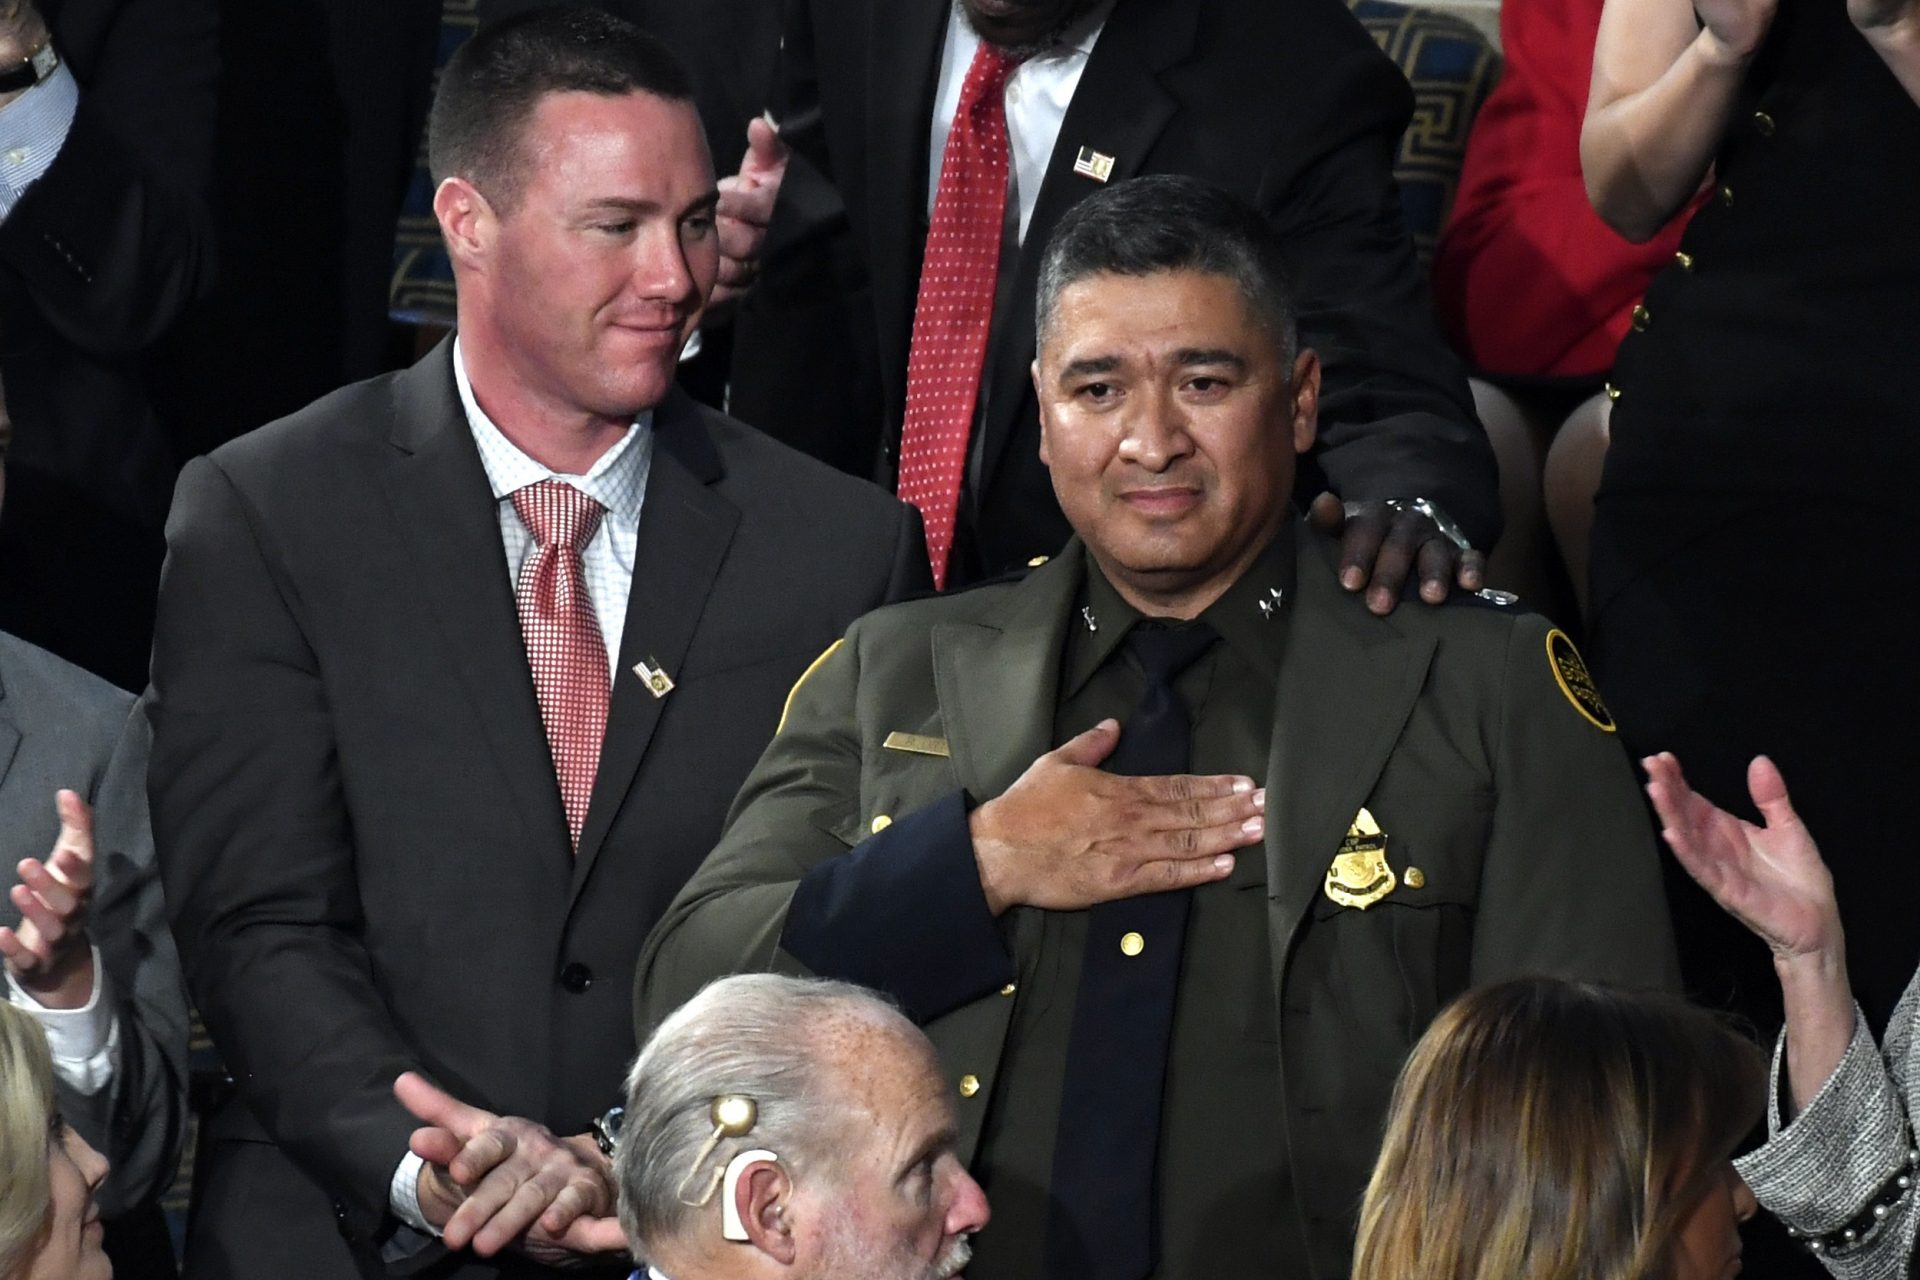 U.S. Border Patrol deputy chief Raul Ortiz of Del Rio, Texas, is recounted by President Donald Trump during the State of the Union address to a joint session of Congress on Capitol Hill in Washington, Tuesday, Feb. 4, 2020.